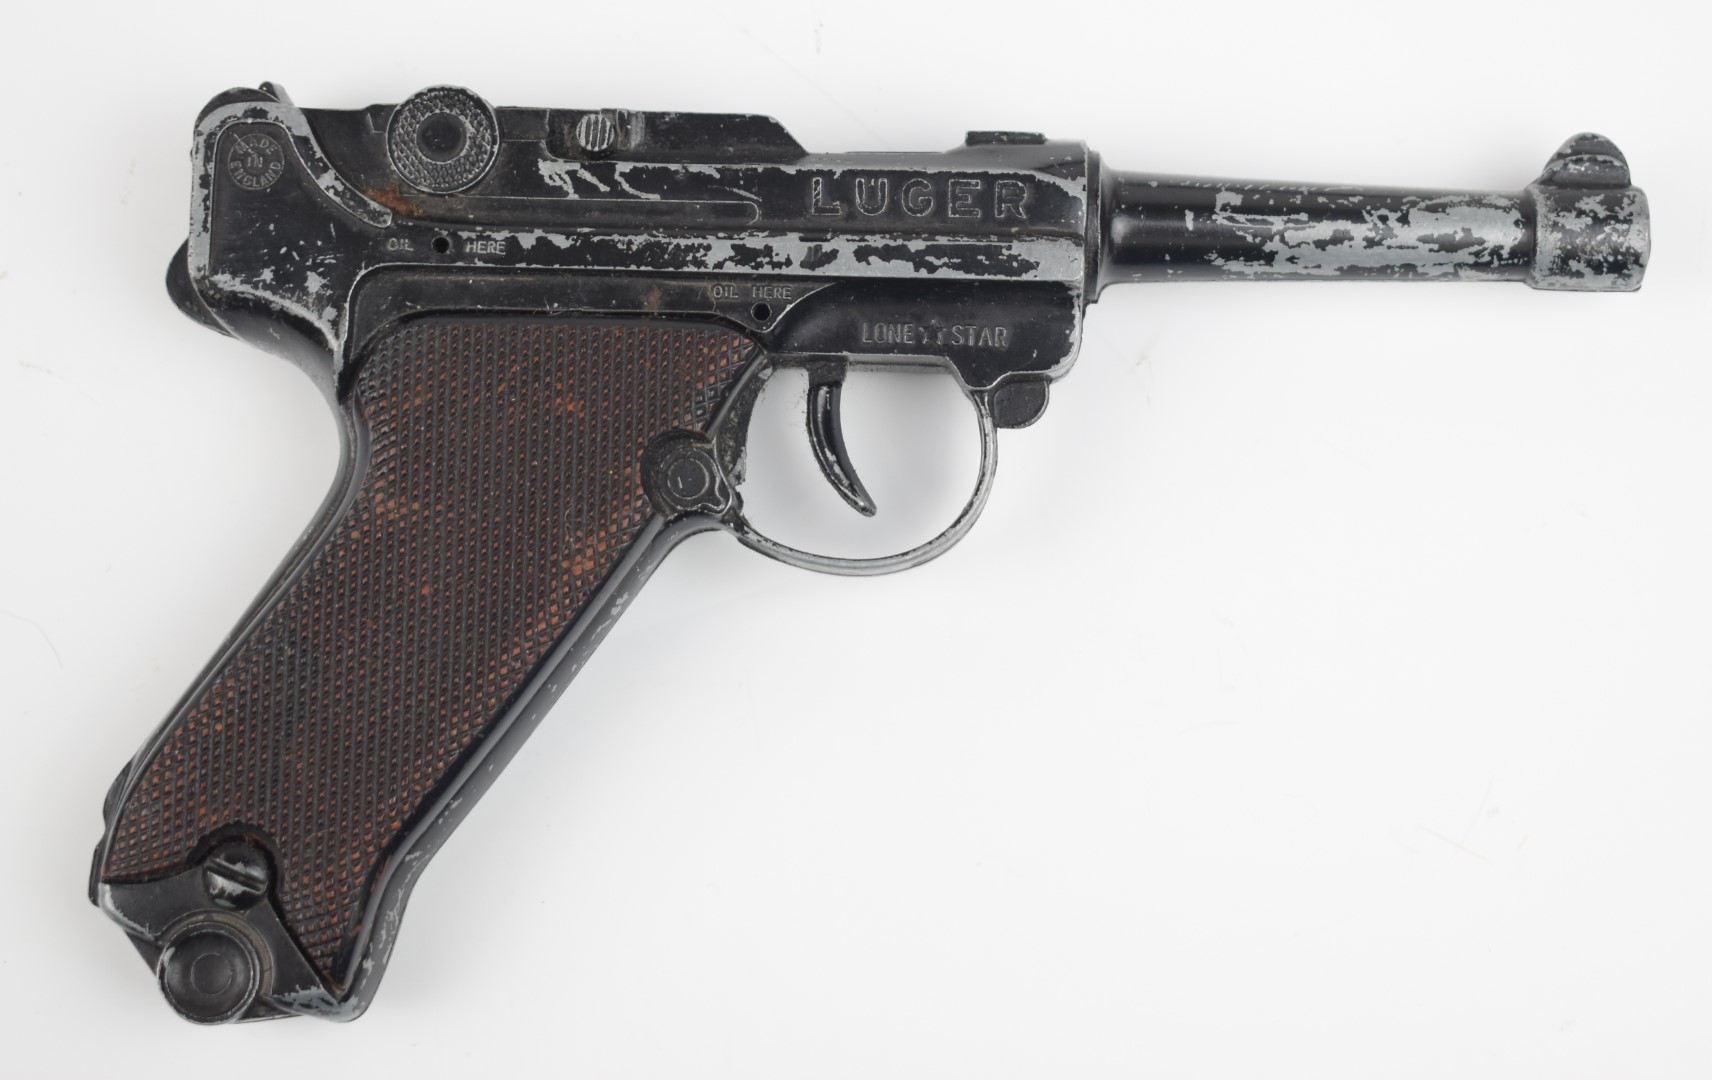 Eight replica or blank firing pistols and revolvers including Luger, StripMatic etc. - Image 4 of 9